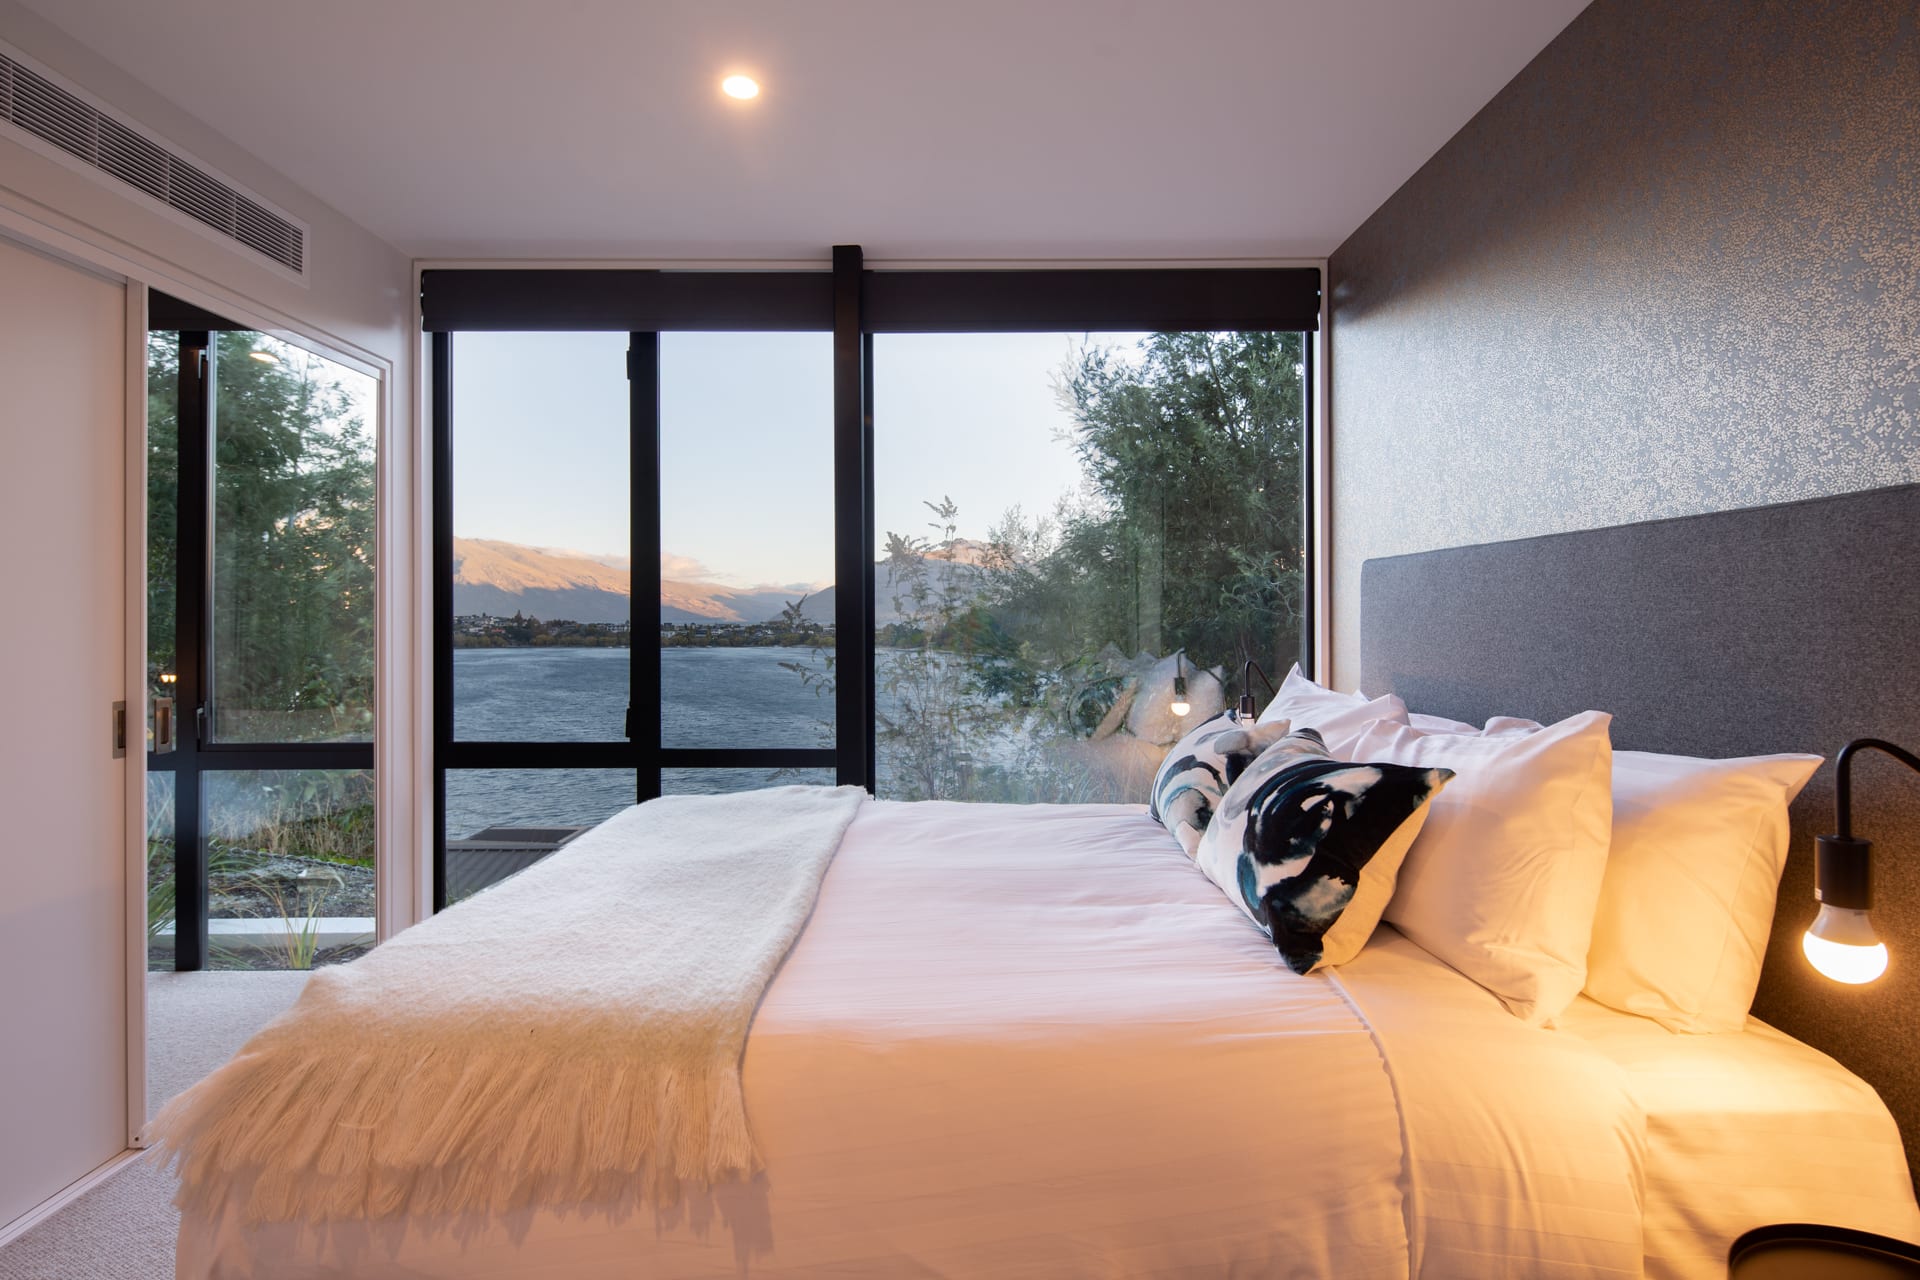 Bedroom 3 with incredible views